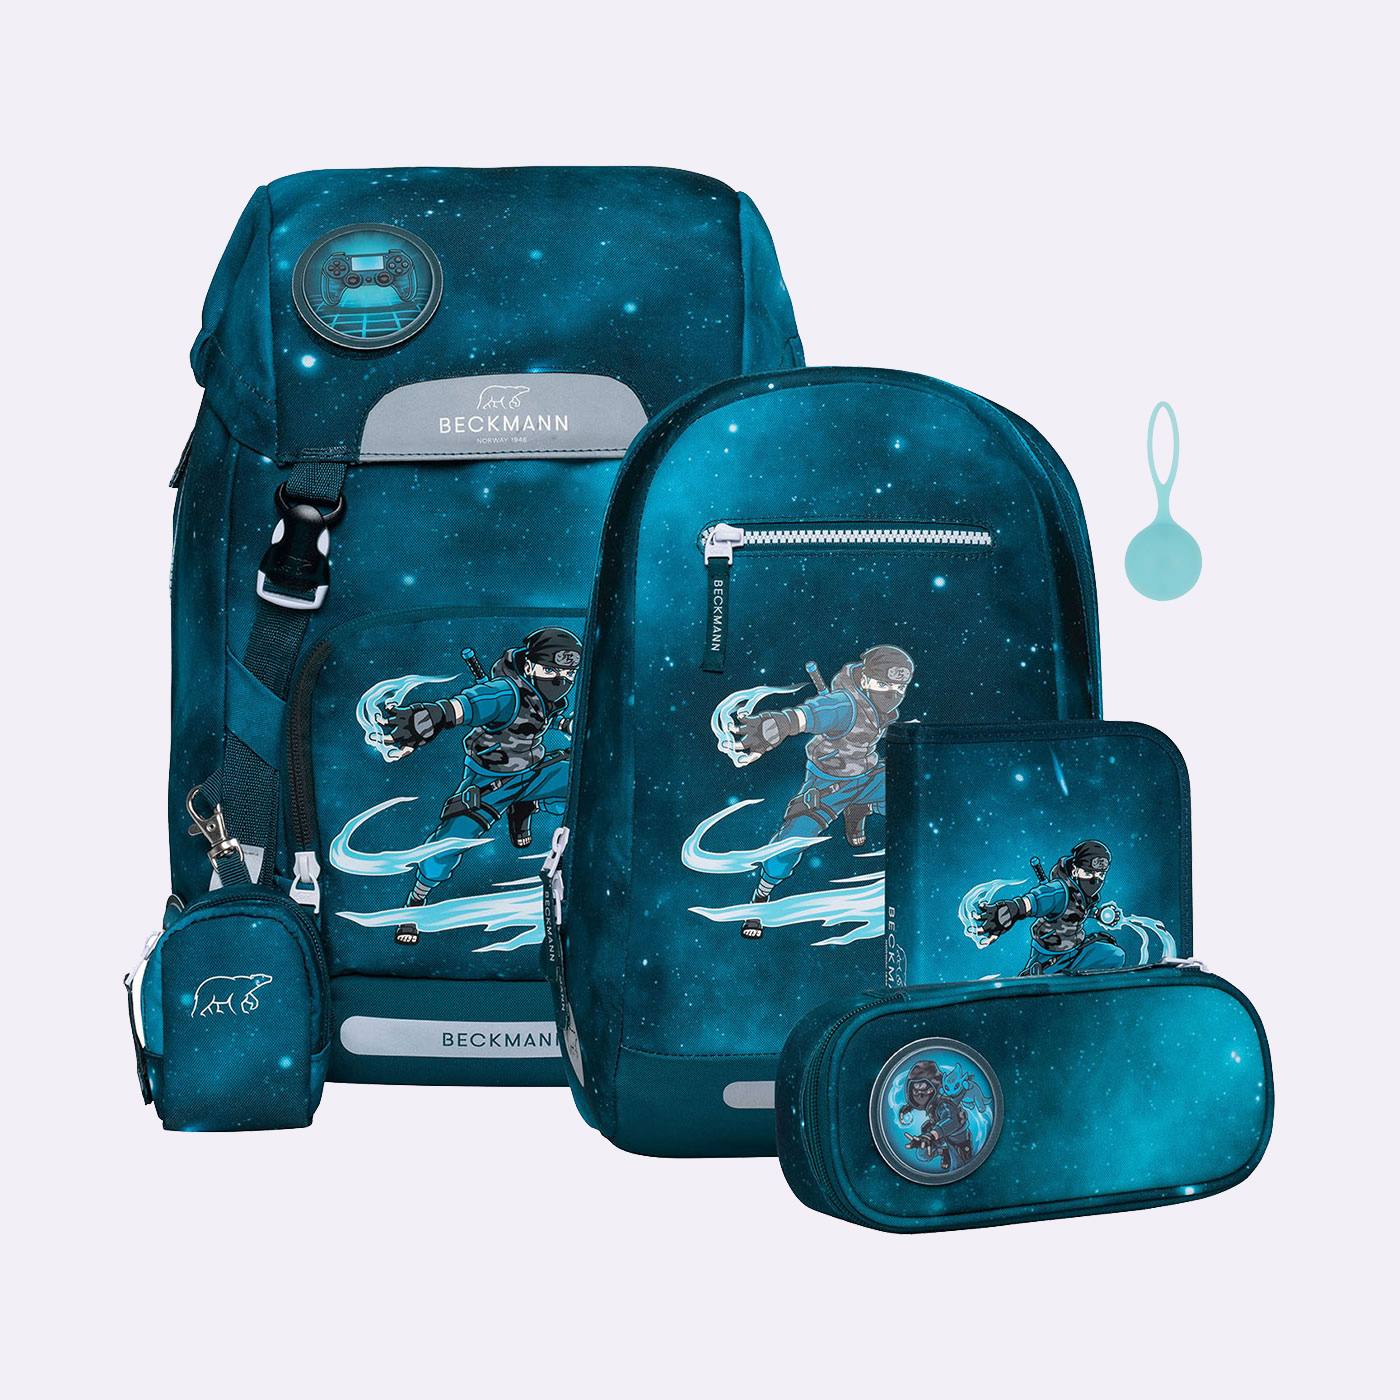 Support Carry League of Legends' Duffle Bag